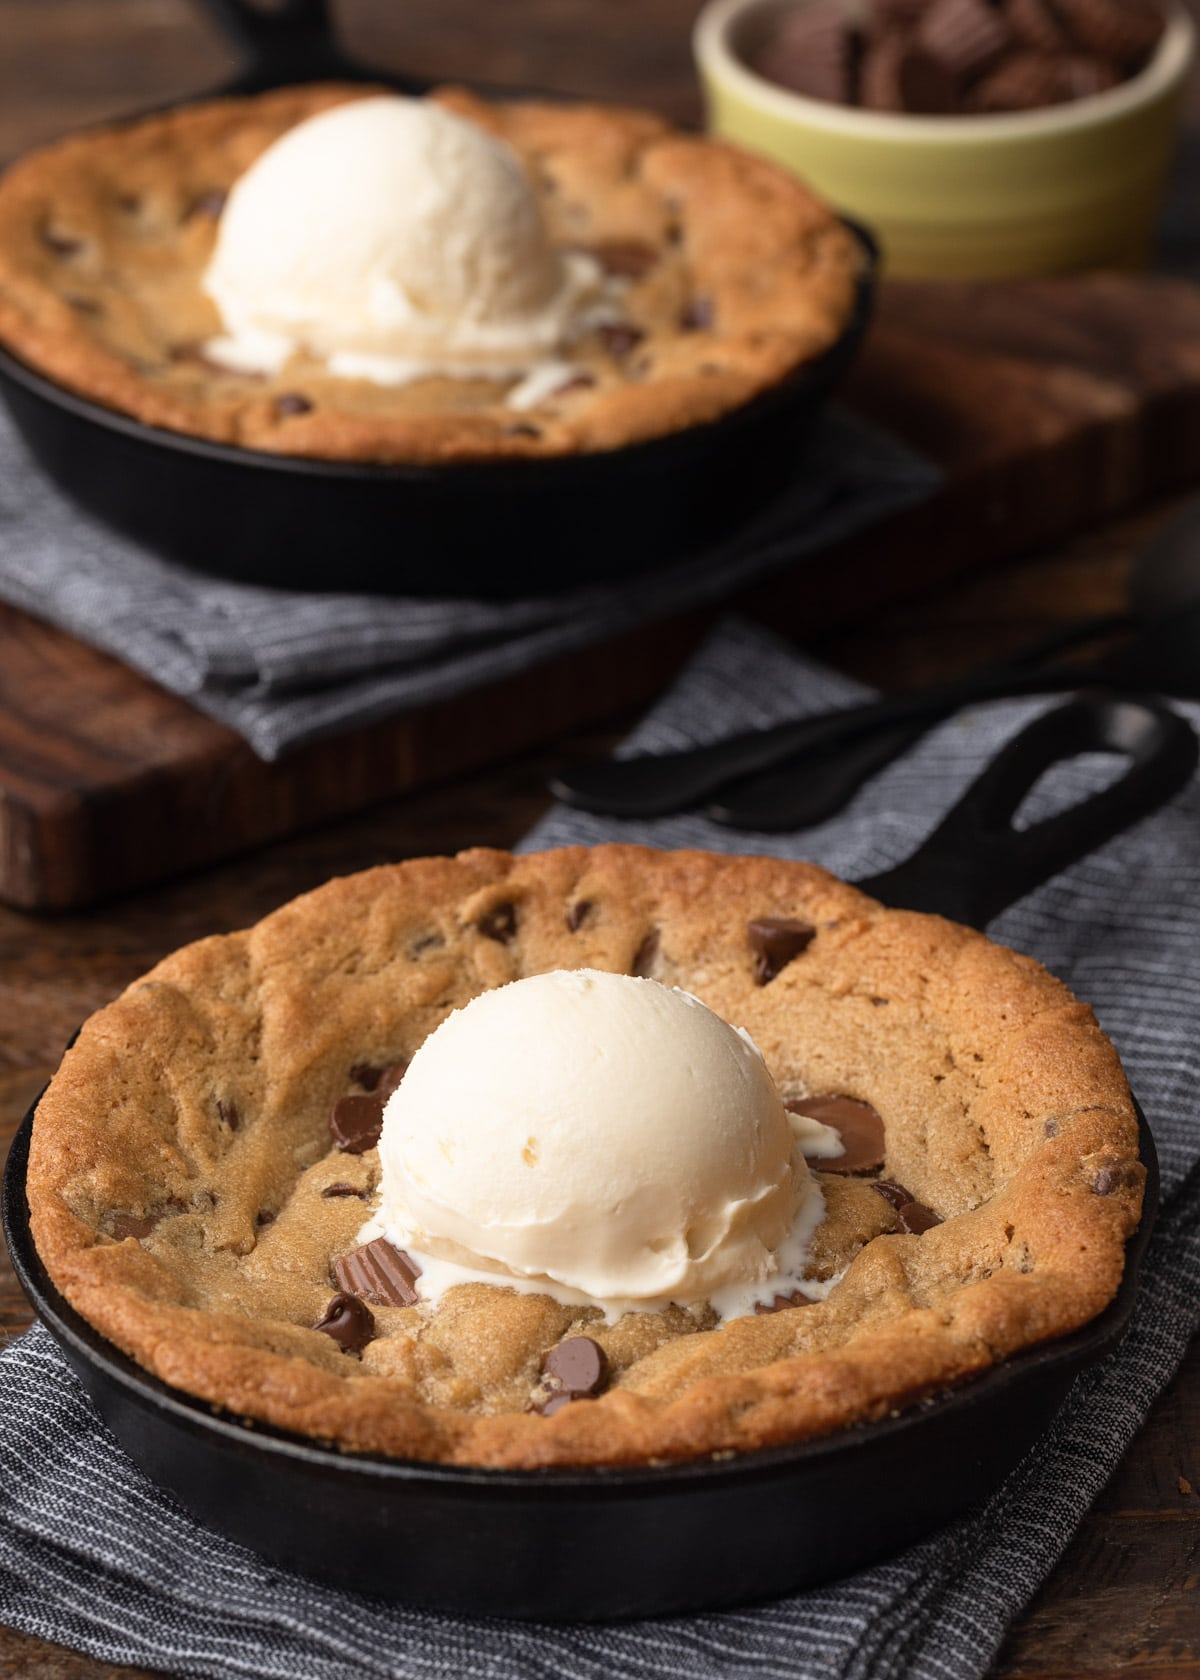 baked peanut butter skillet cookies with scoops of vanilla ice cream